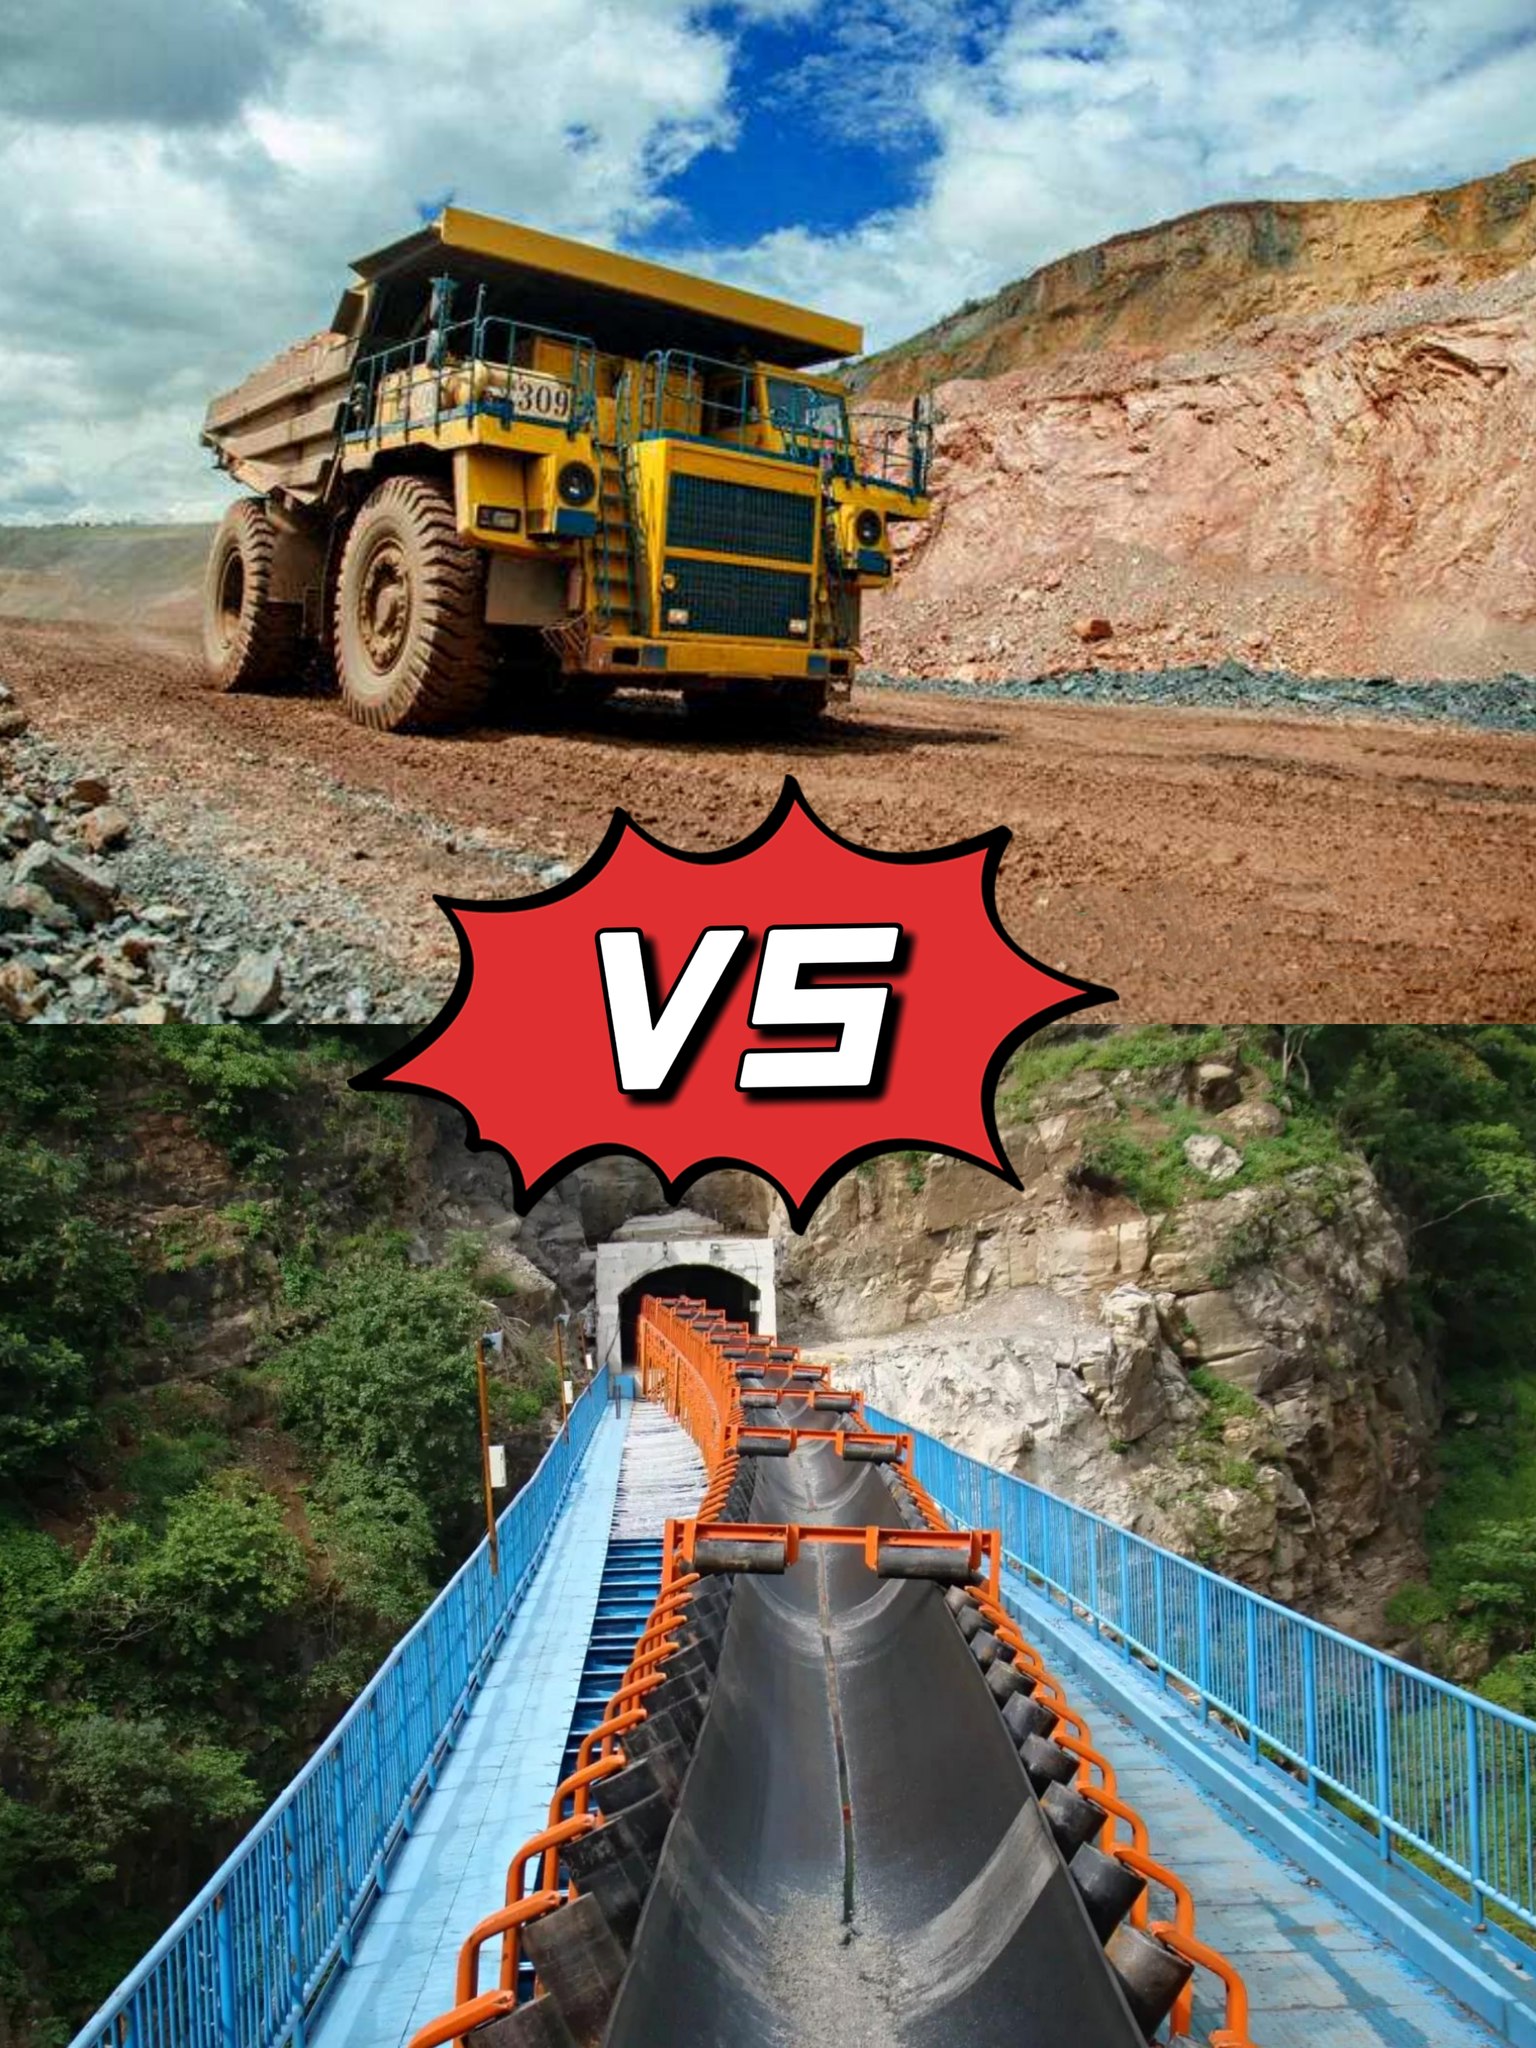 What do you think about Truck vs conveyor?